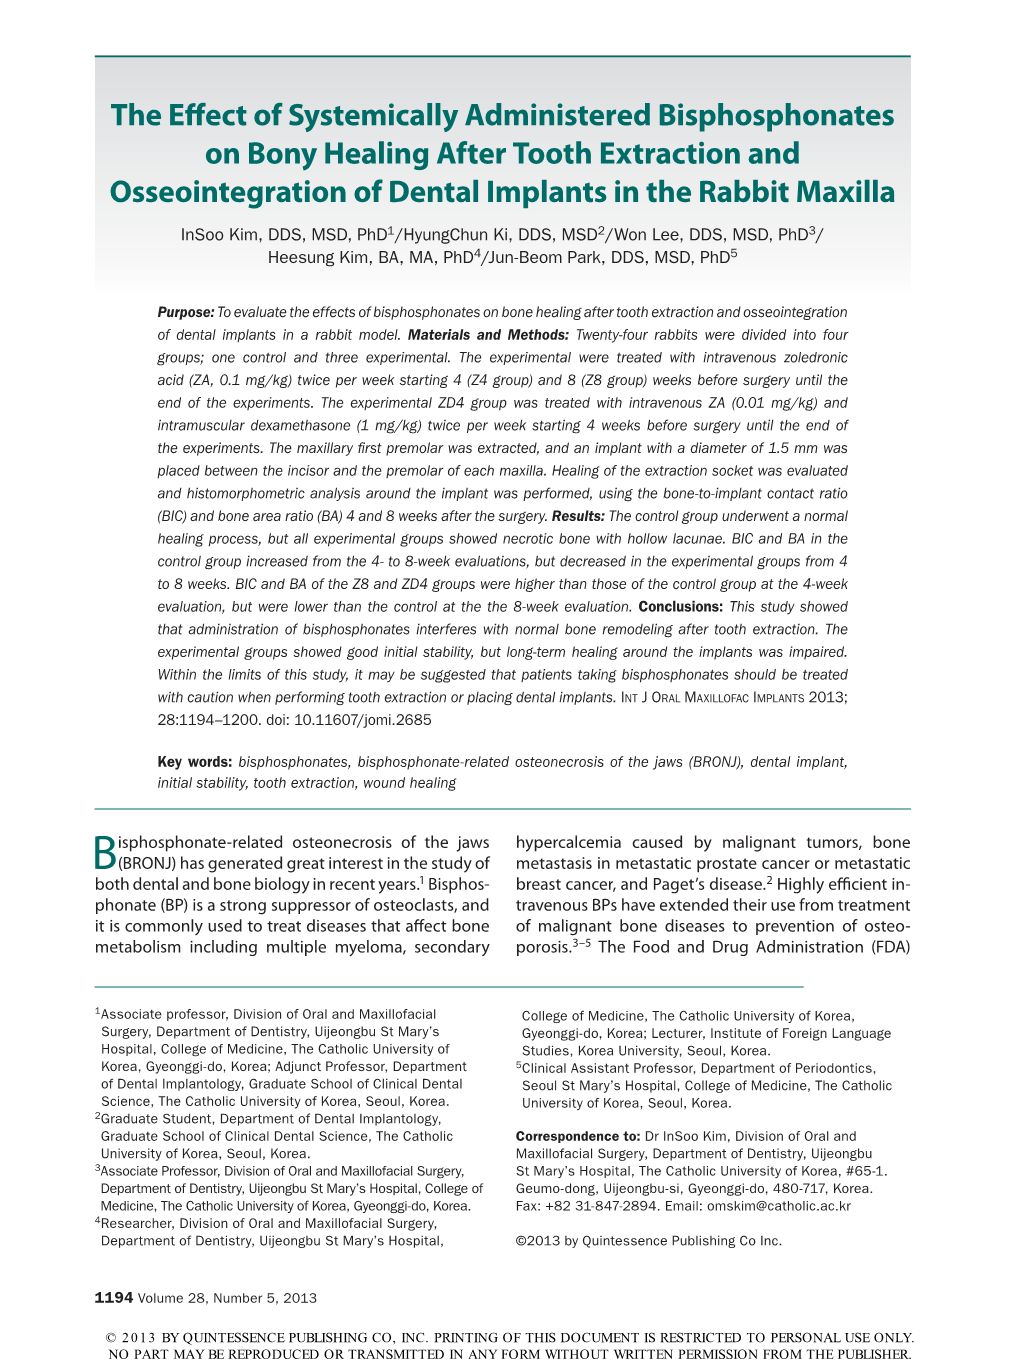 The Effect of Systemically Administered Bisphosphonates on Bony Healing After Tooth Extraction and Osseointegration of Dental Implants in the Rabbit Maxilla